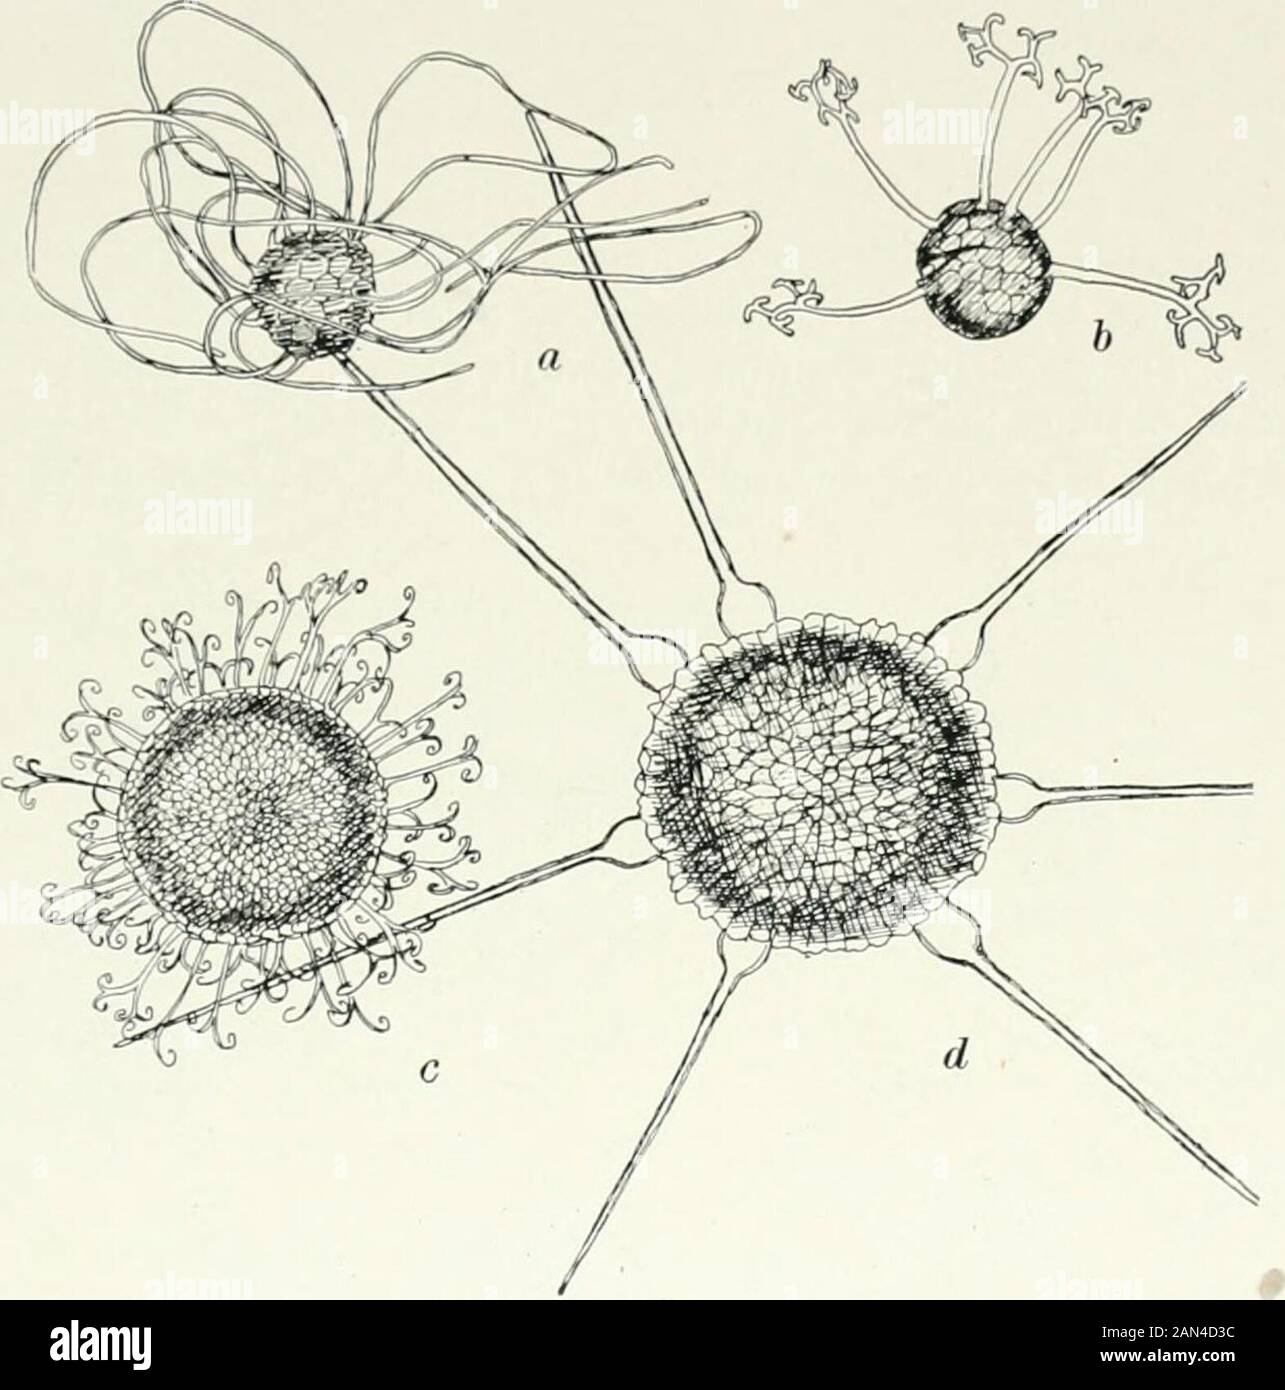 Fungi, Ascomycetes, Ustilaginales, Uredinales . s genusalso the apex of the  perithecium is furnished with a ring of richly branchedpenicillate cells.  At about the time of spore-formation these break down,forming a sticky